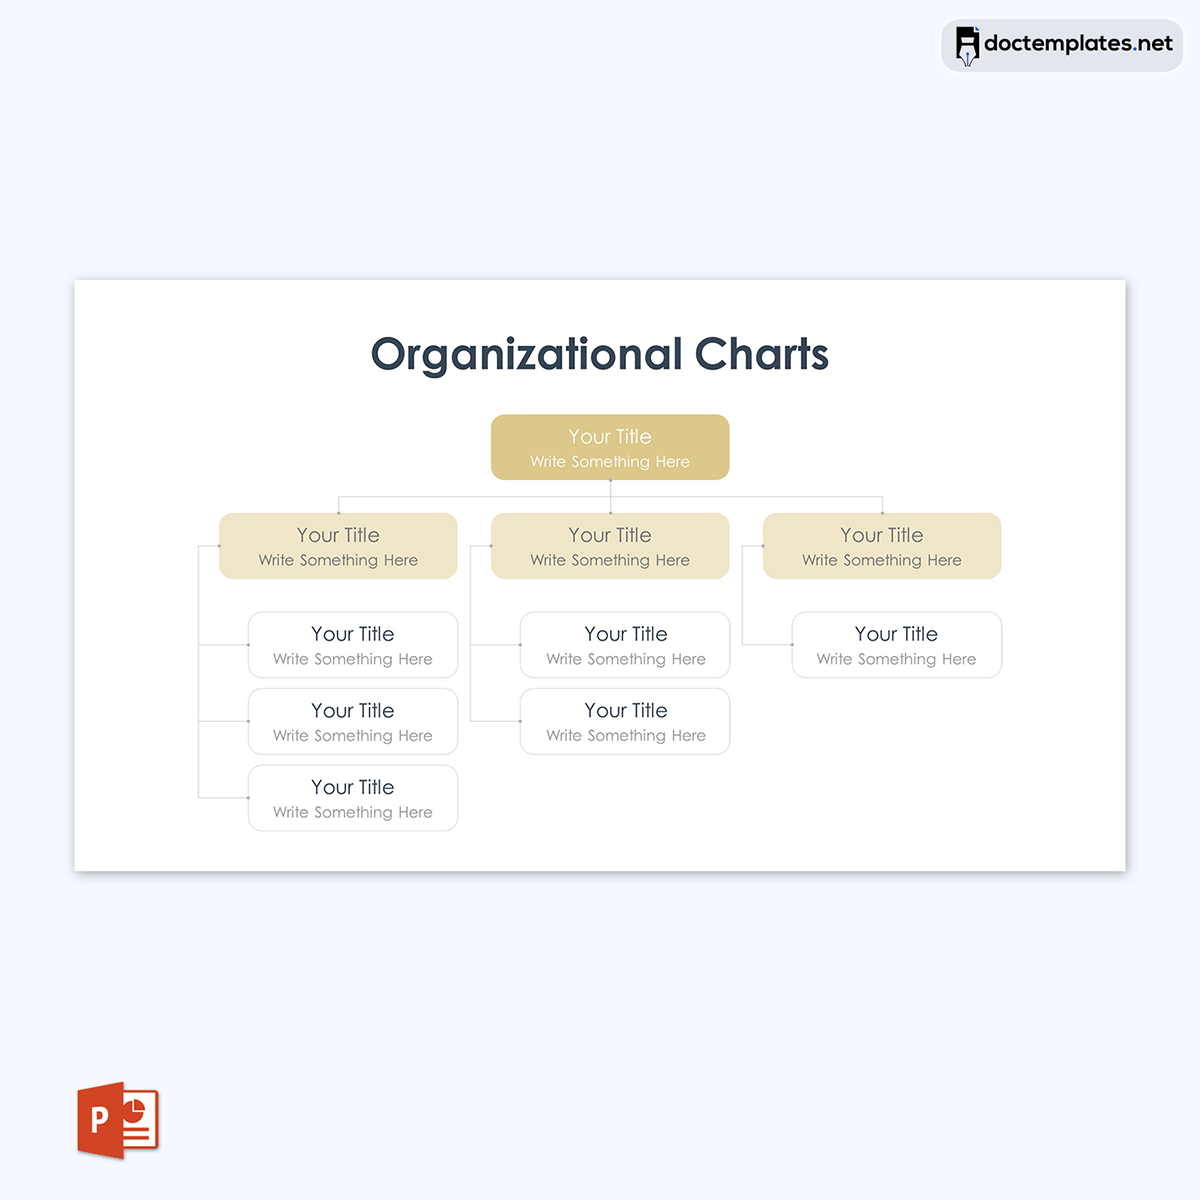 
how to create an org chart in visio from excel
